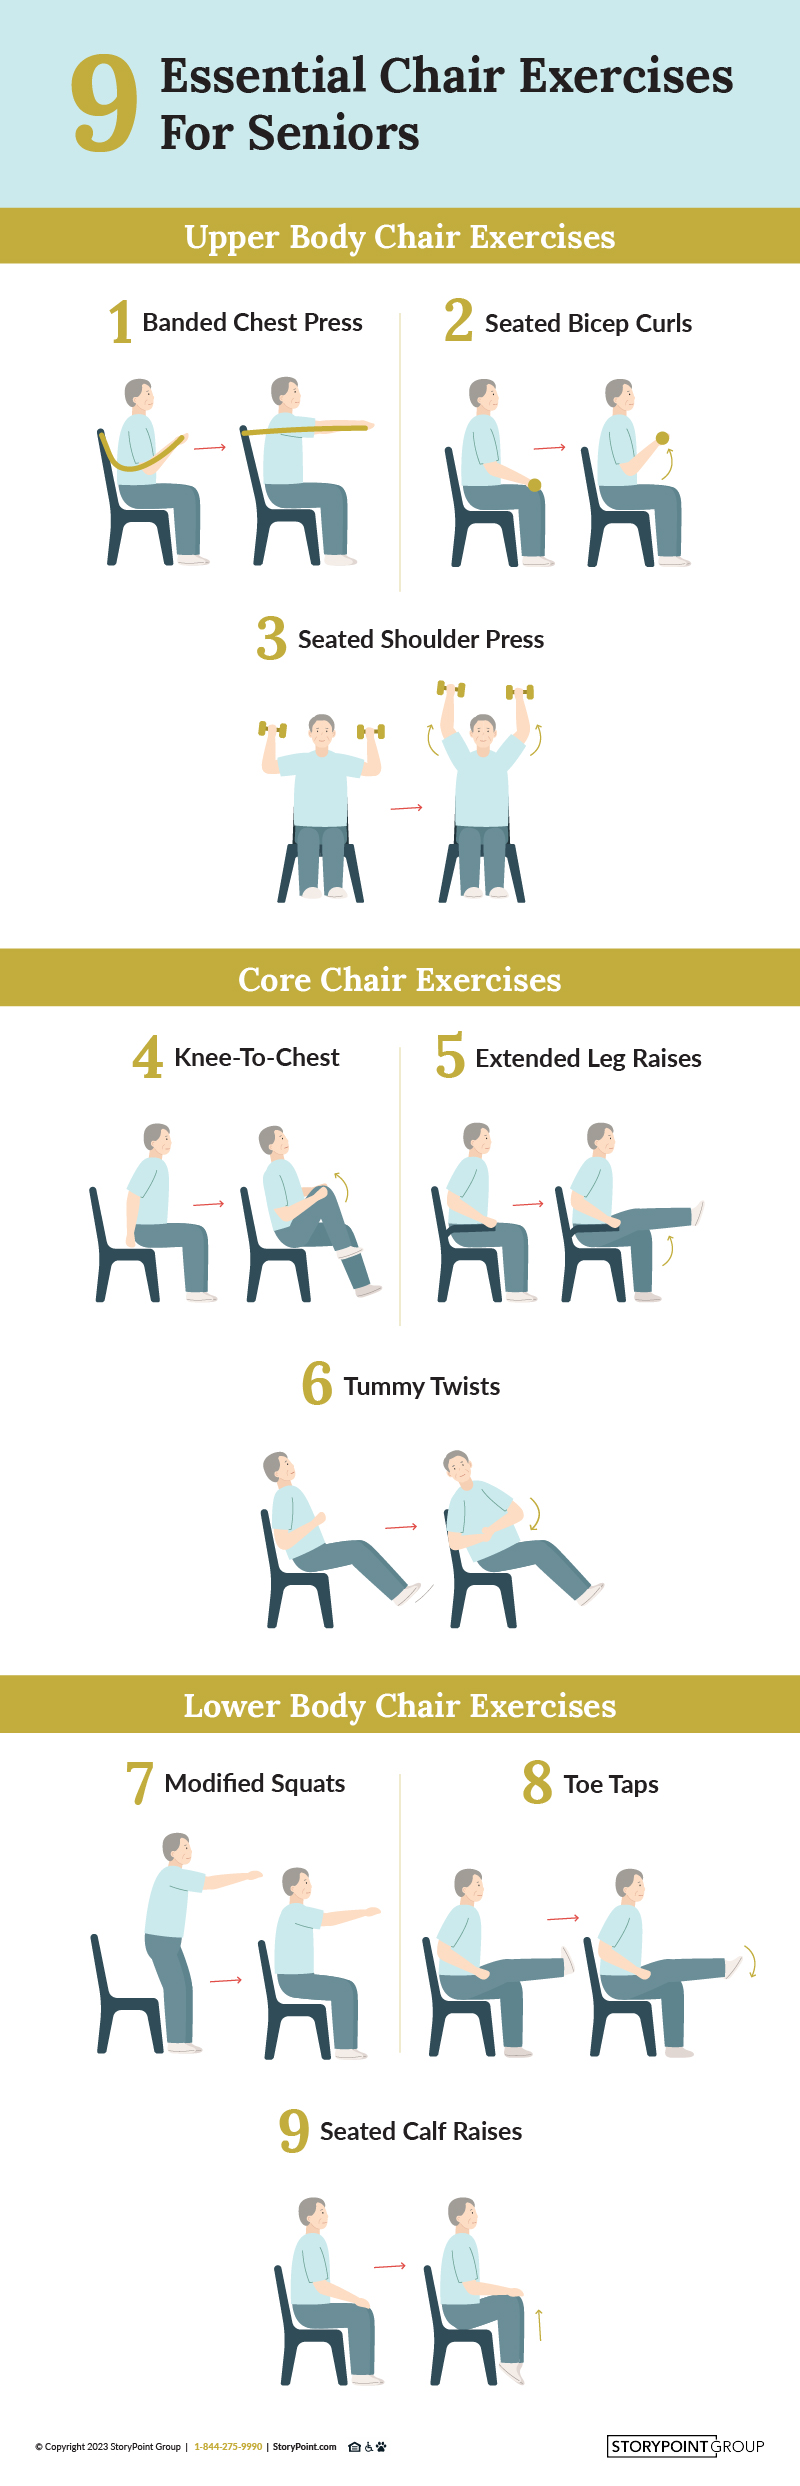 Chair Exercises for Seniors: 4 Moves to Improve Balance